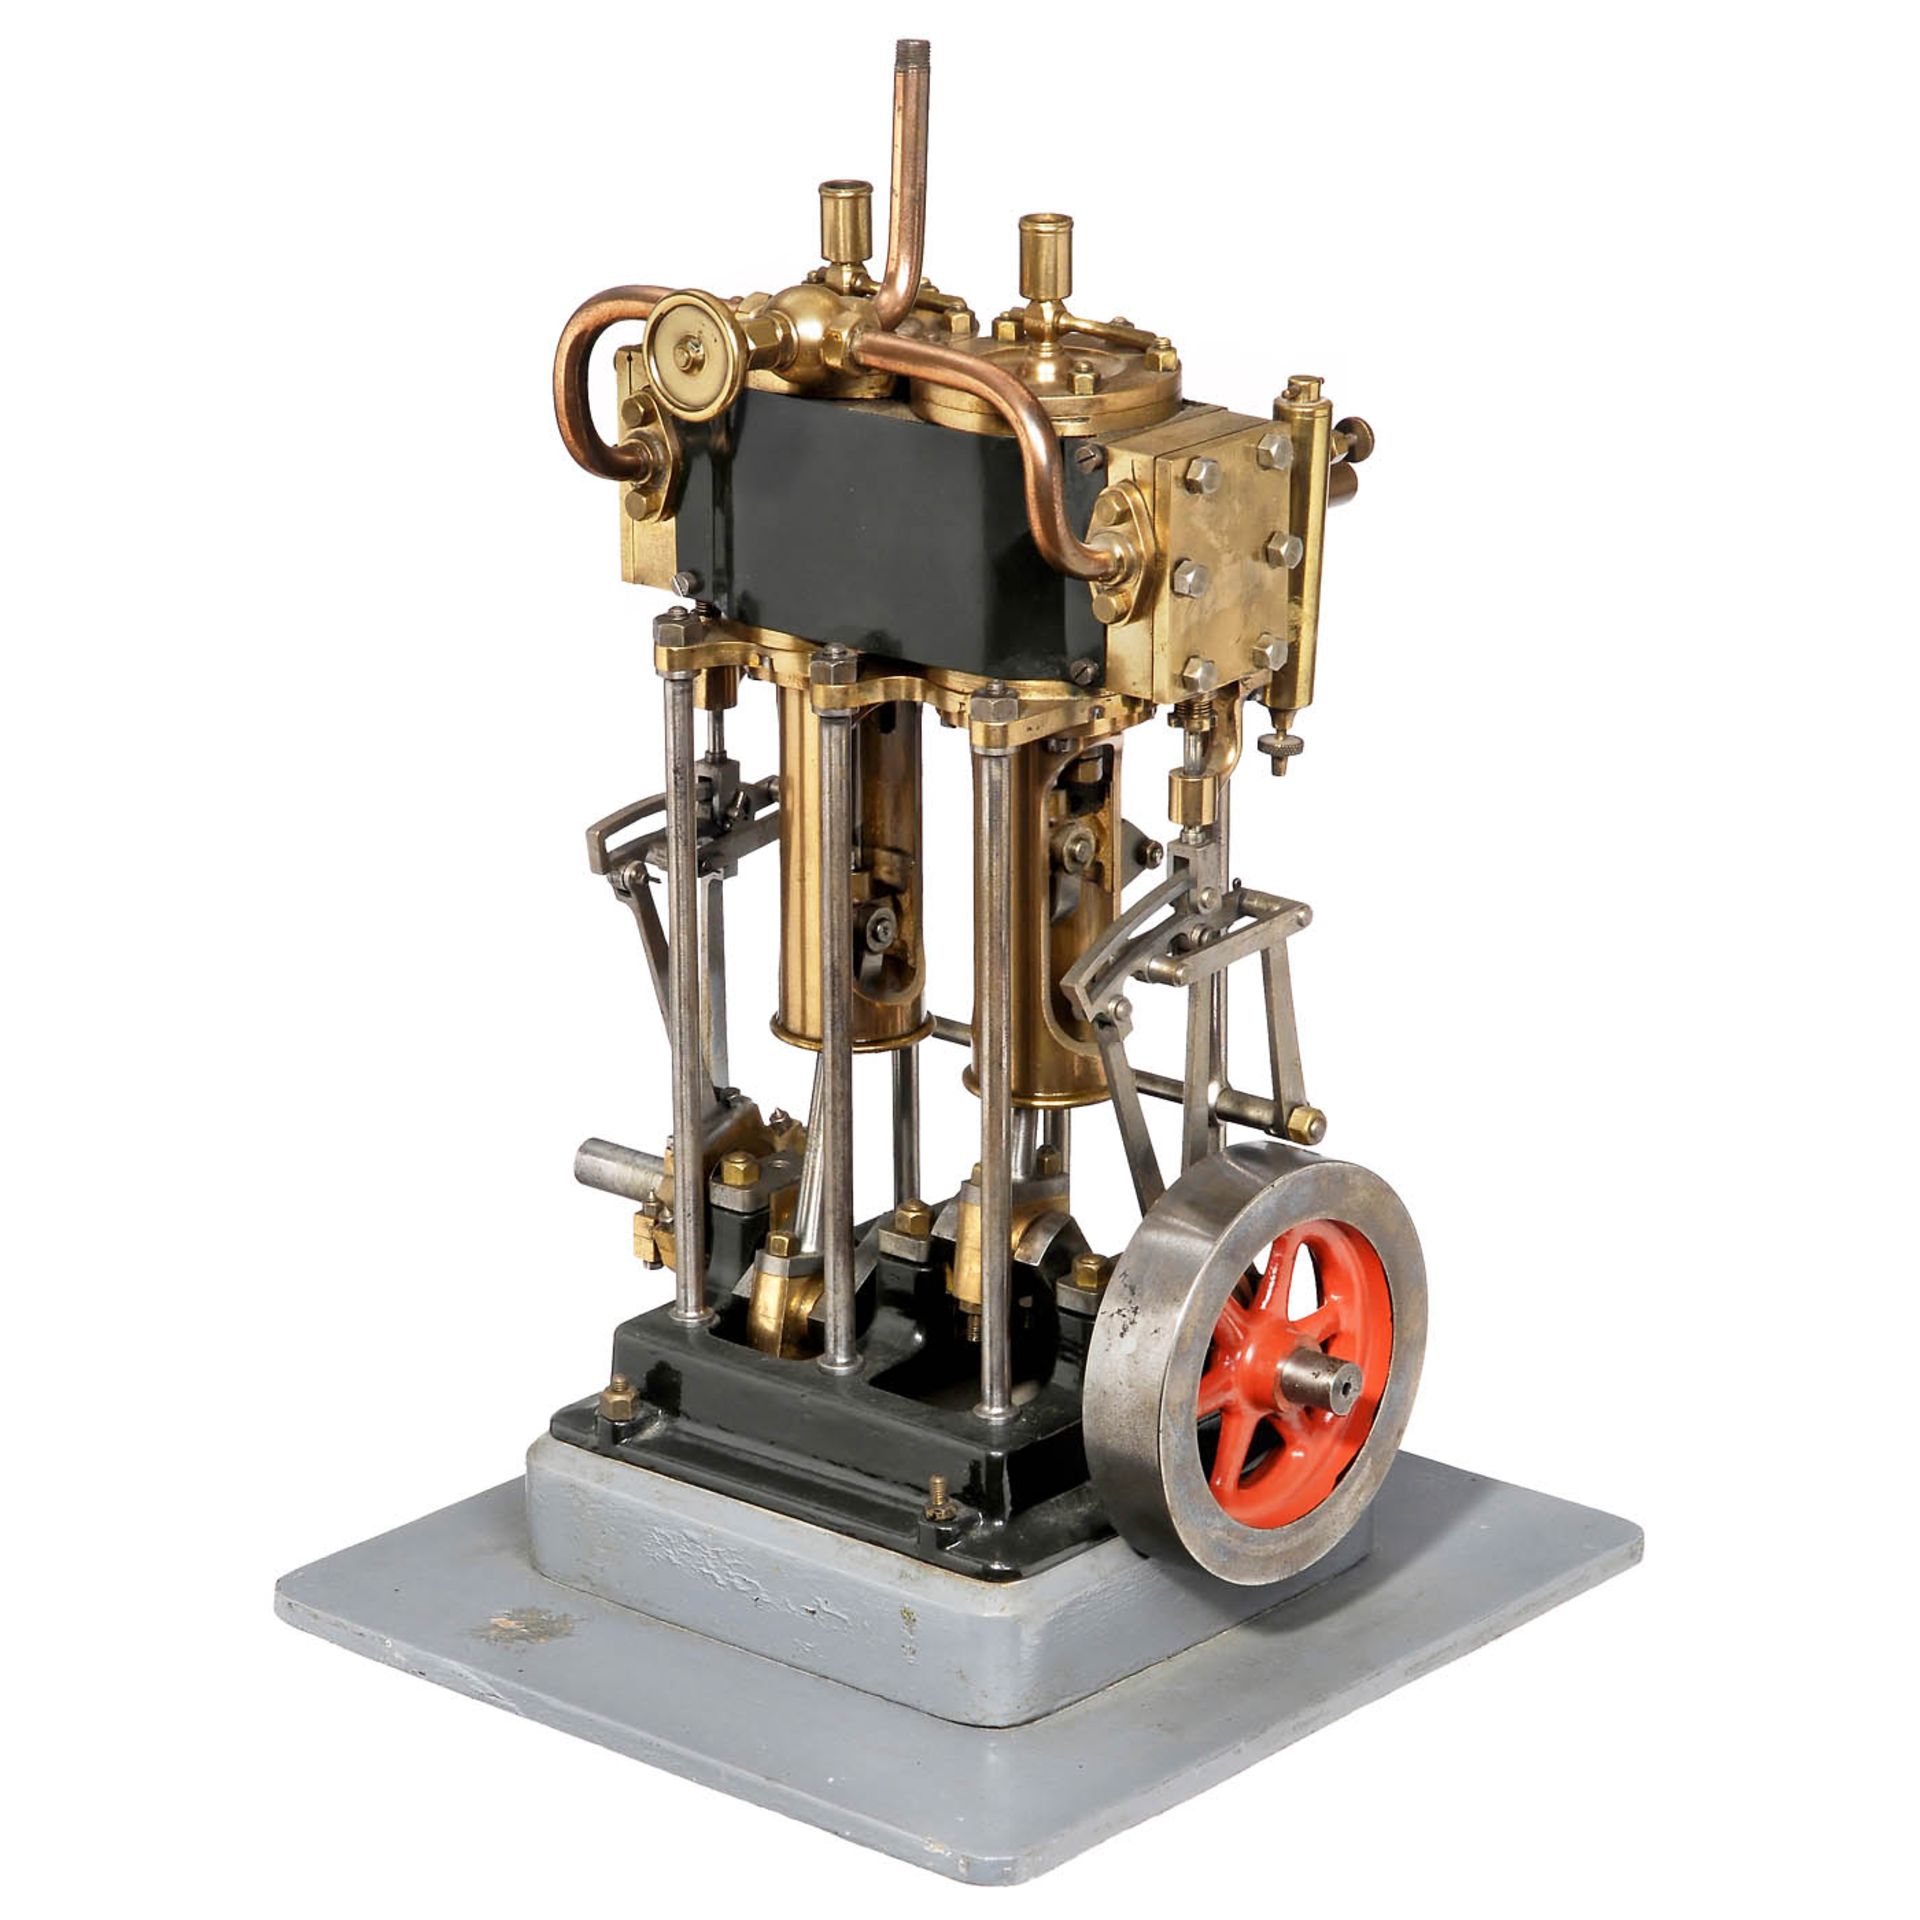 Precision Model of a Vertical Twin-Cylinder Steam Engine, c. 1960